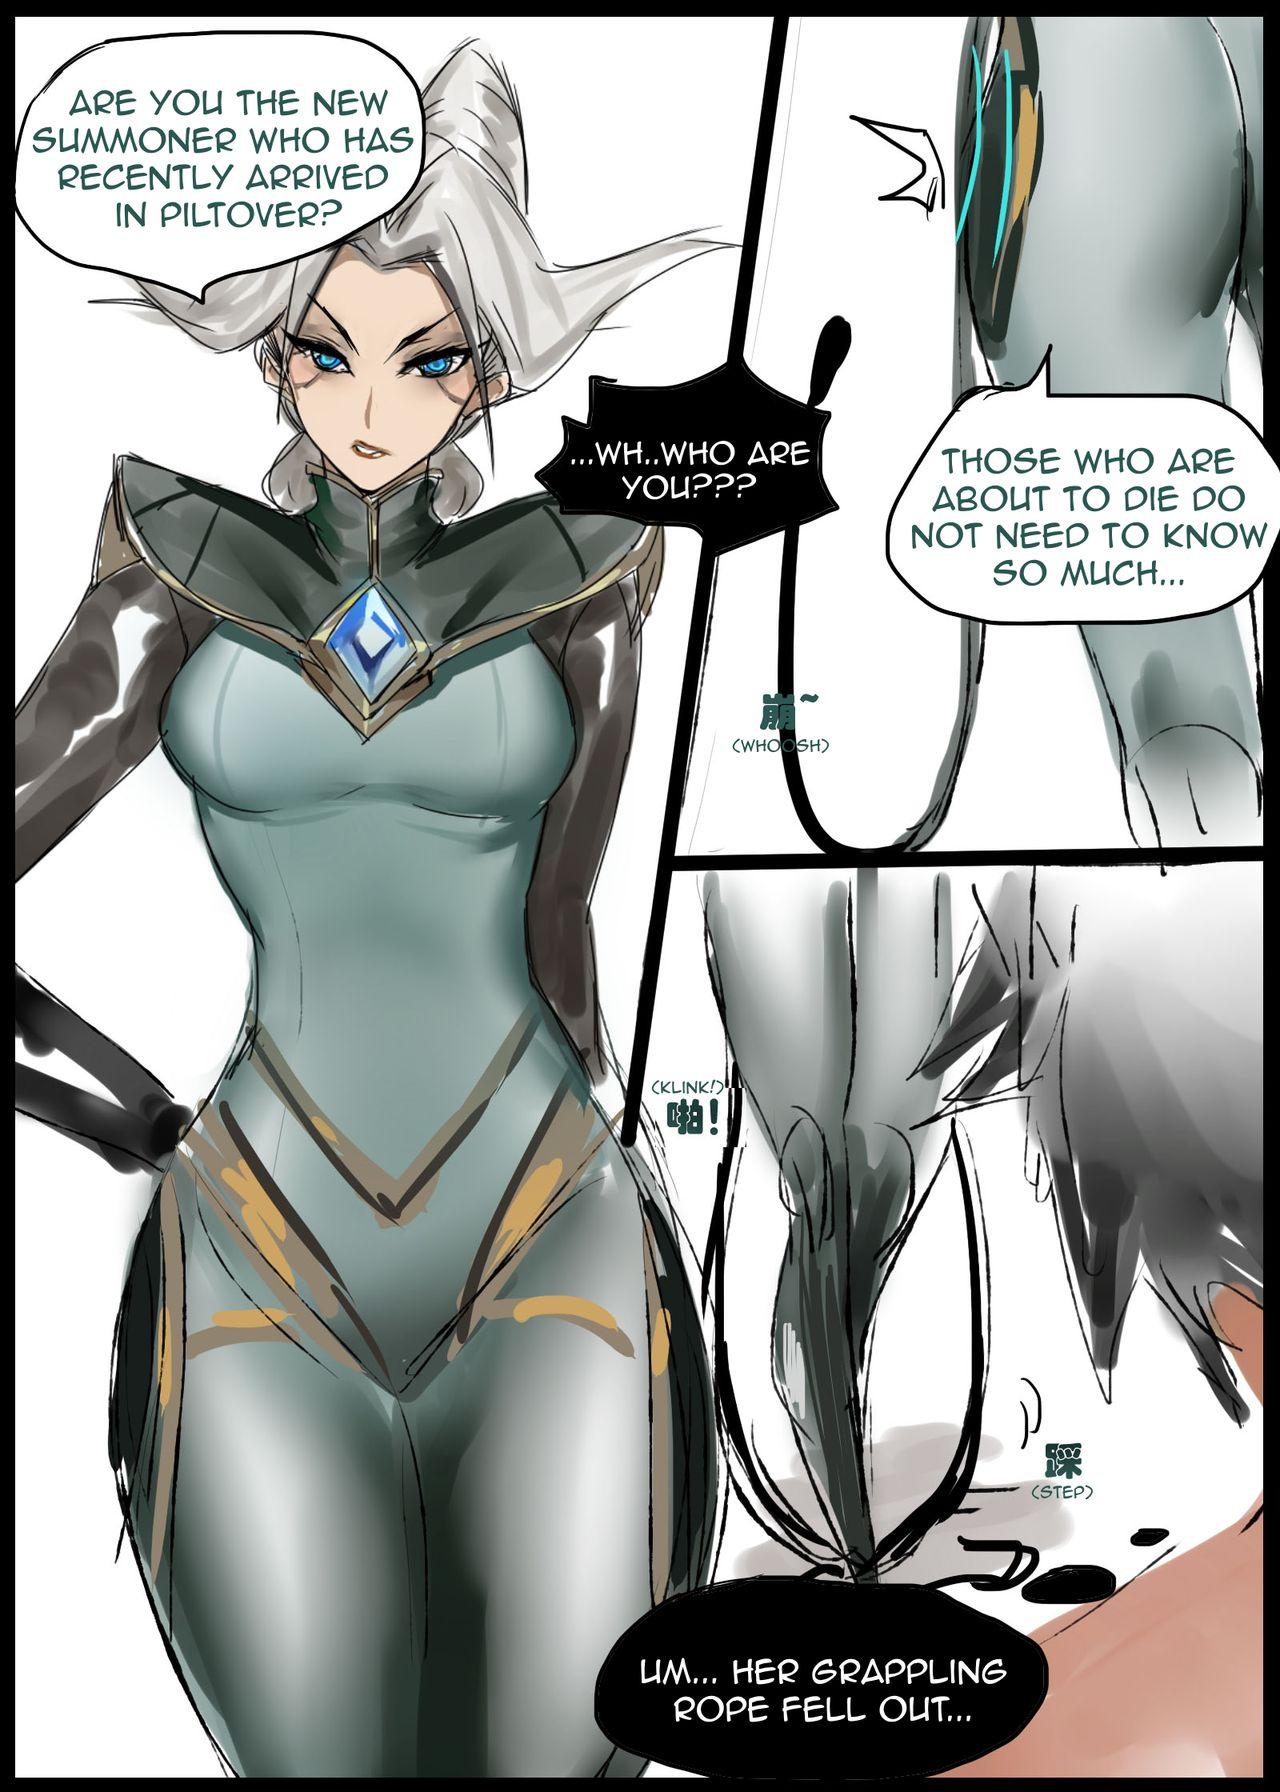 Tits The Steel Shadow - The Mission Begins - League of legends Gagging - Page 2